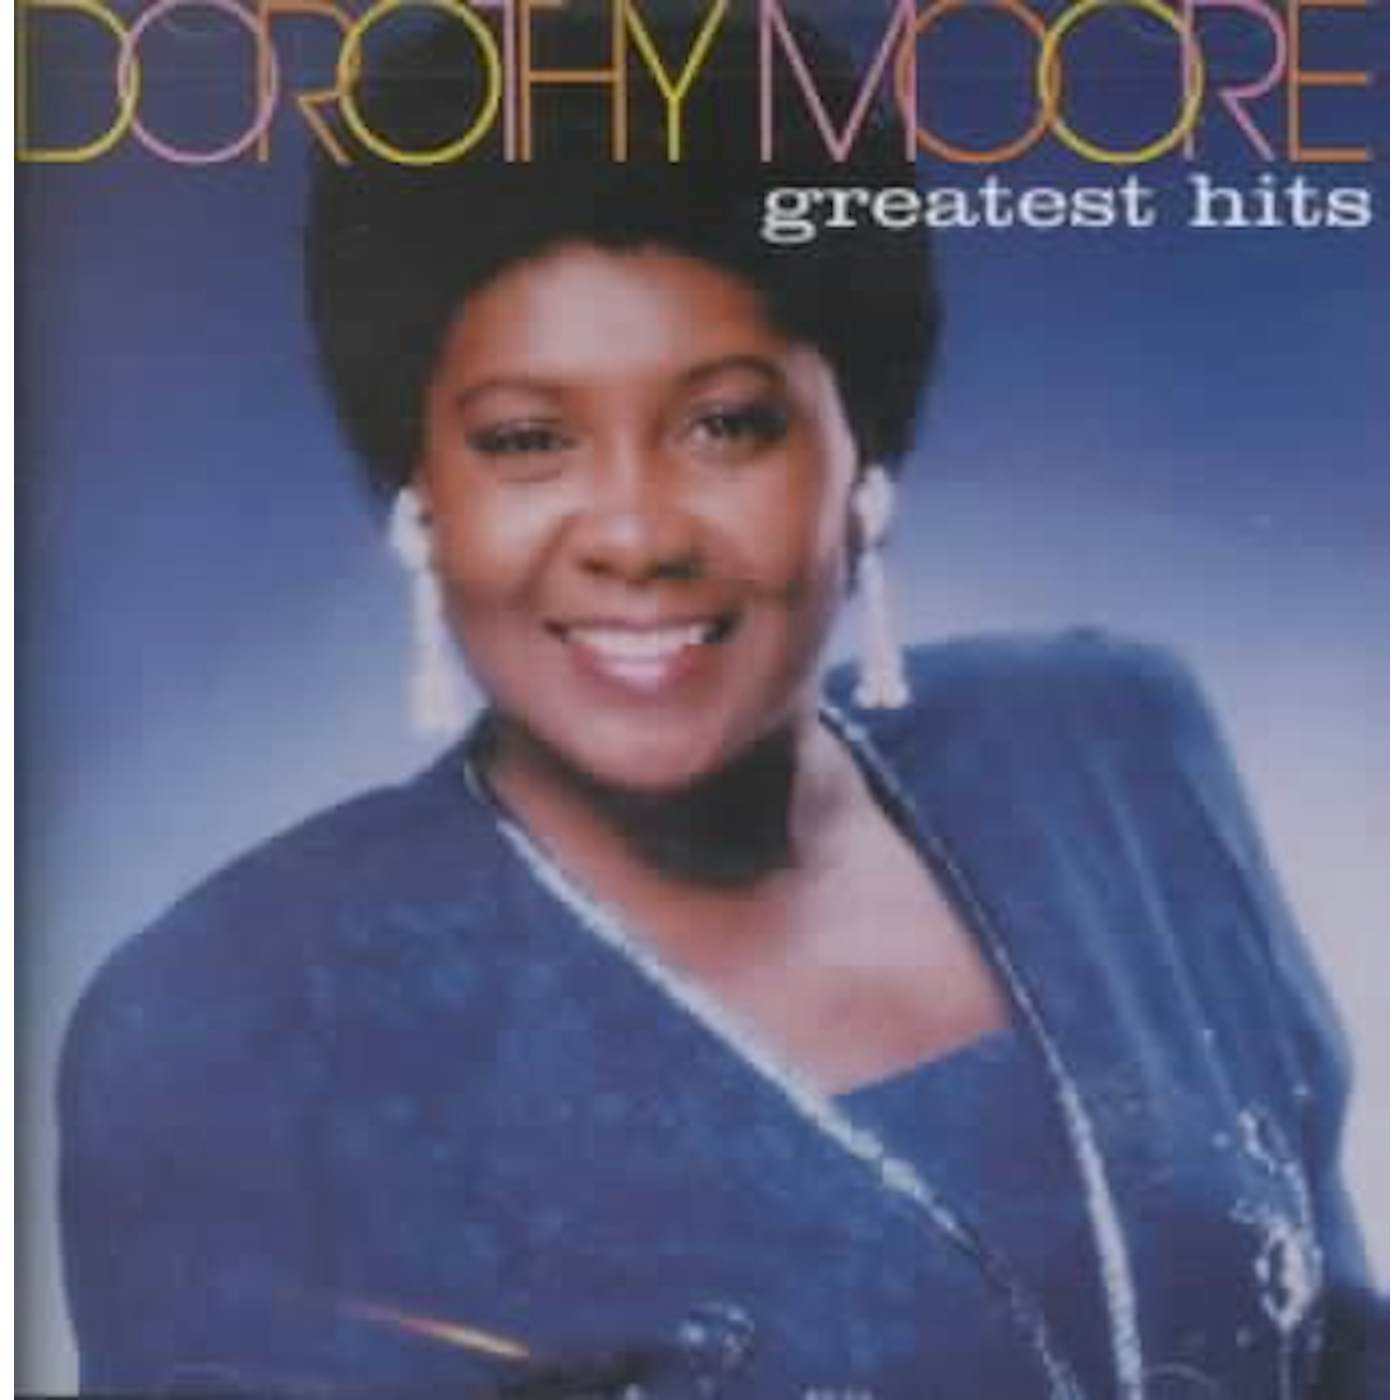 Dorothy Moore Greatest Hits CD